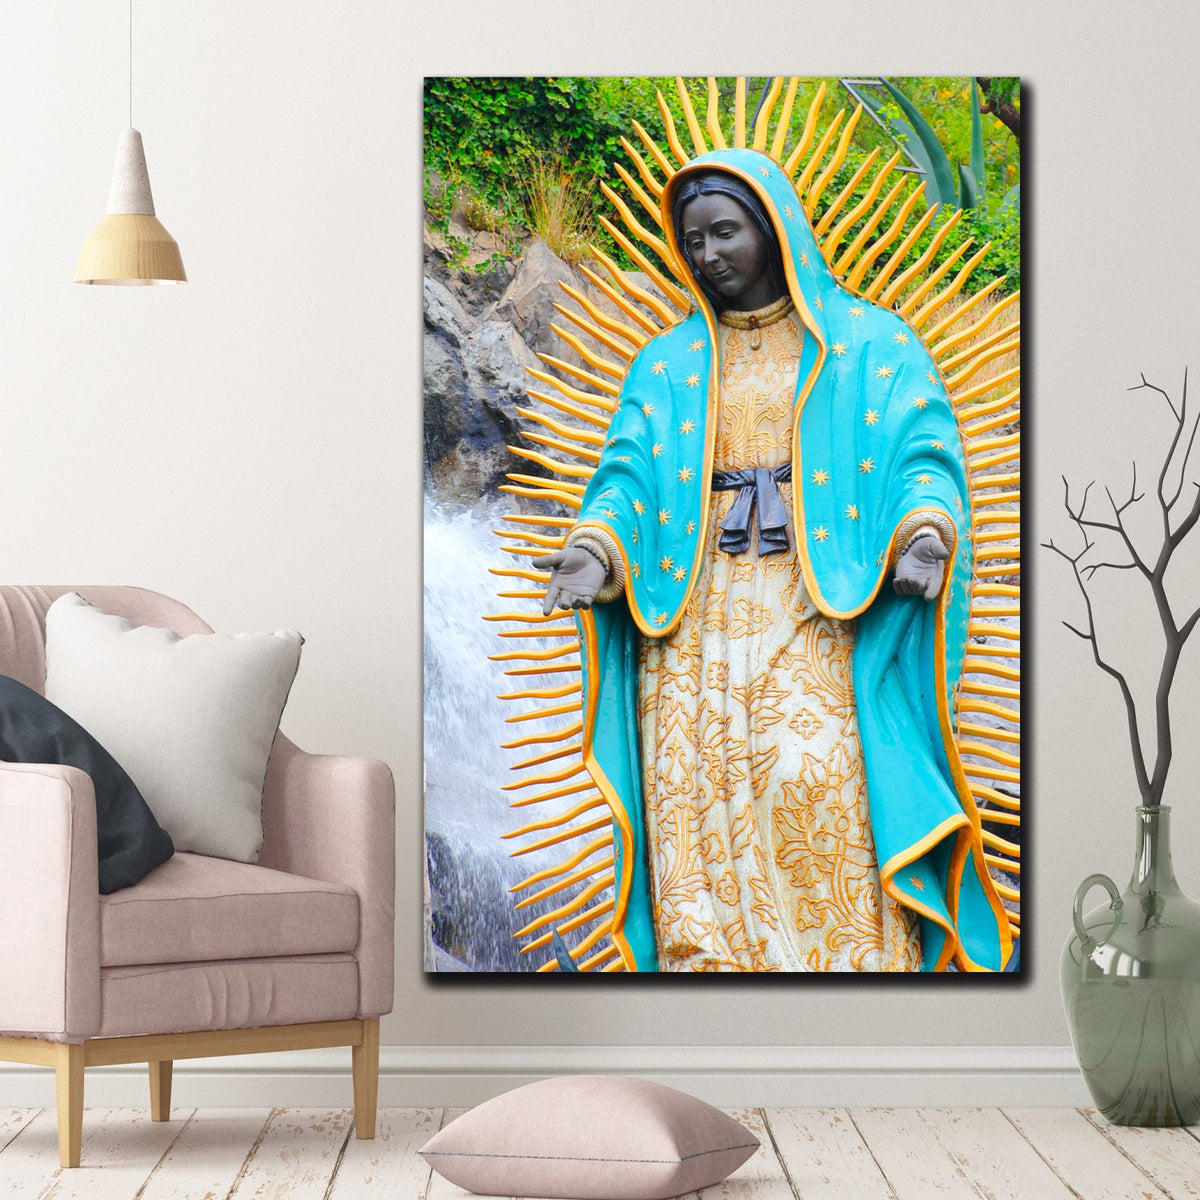 https://cdn.shopify.com/s/files/1/0387/9986/8044/products/TheVirginofGuadalupeCanvasArtprintStretched-2.jpg